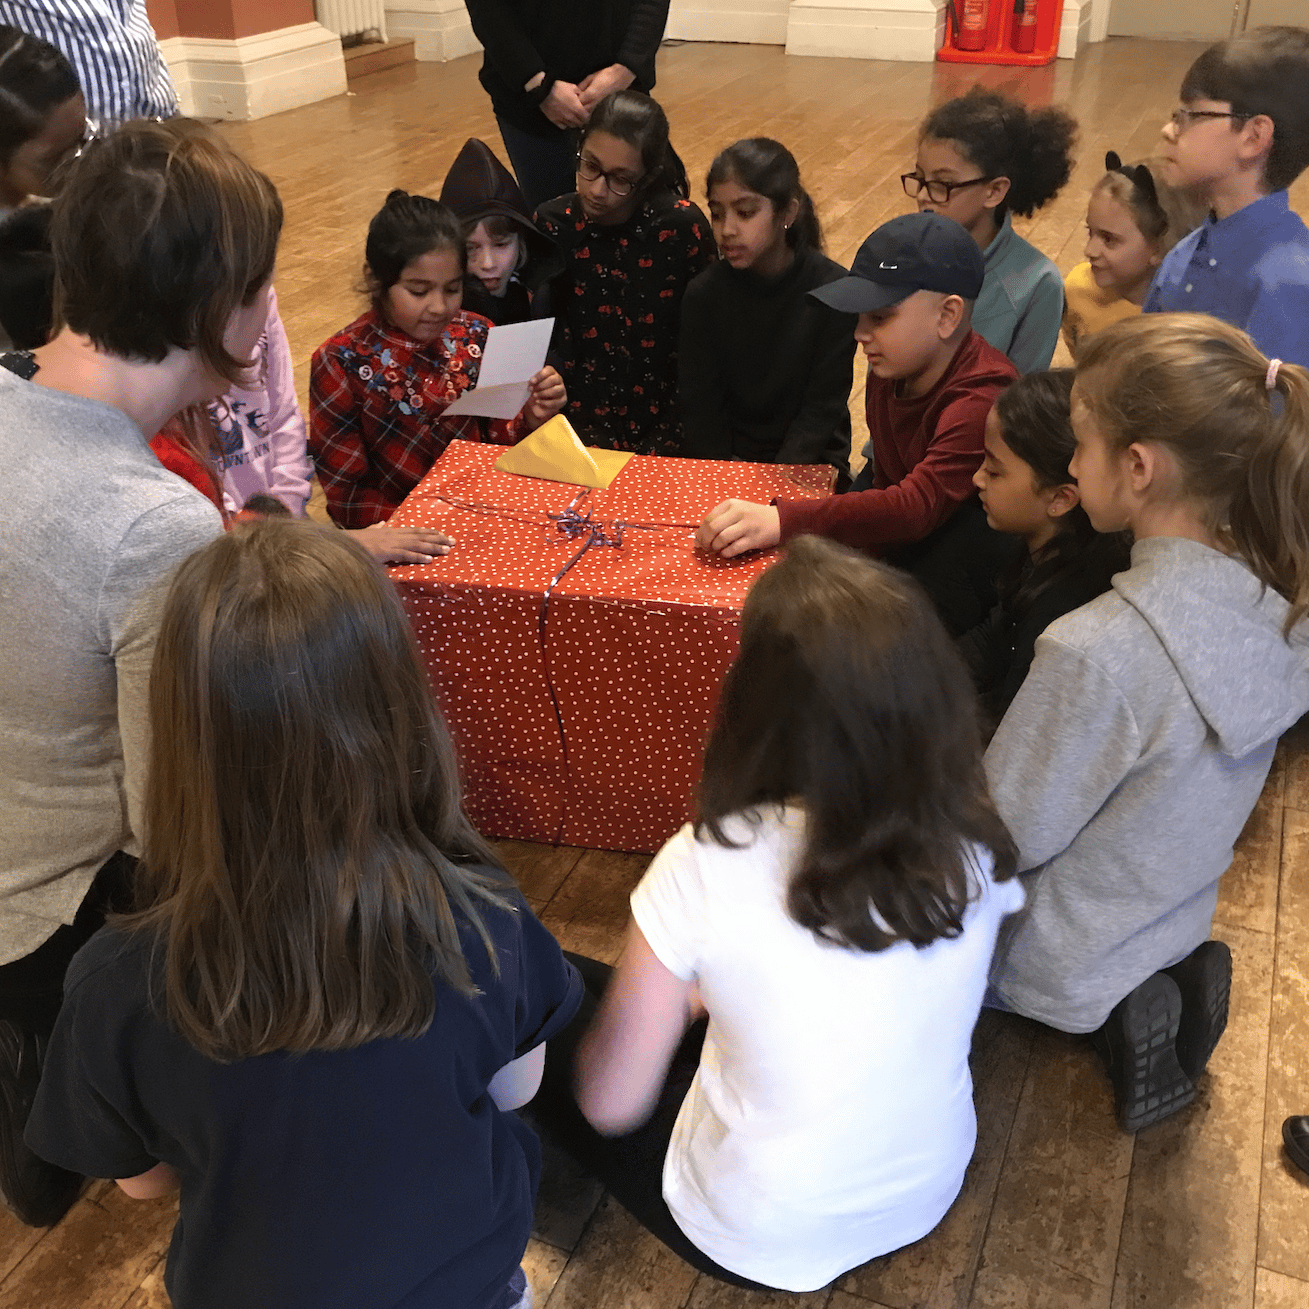 Photograph of children crowded round a large red gift wrapped box.